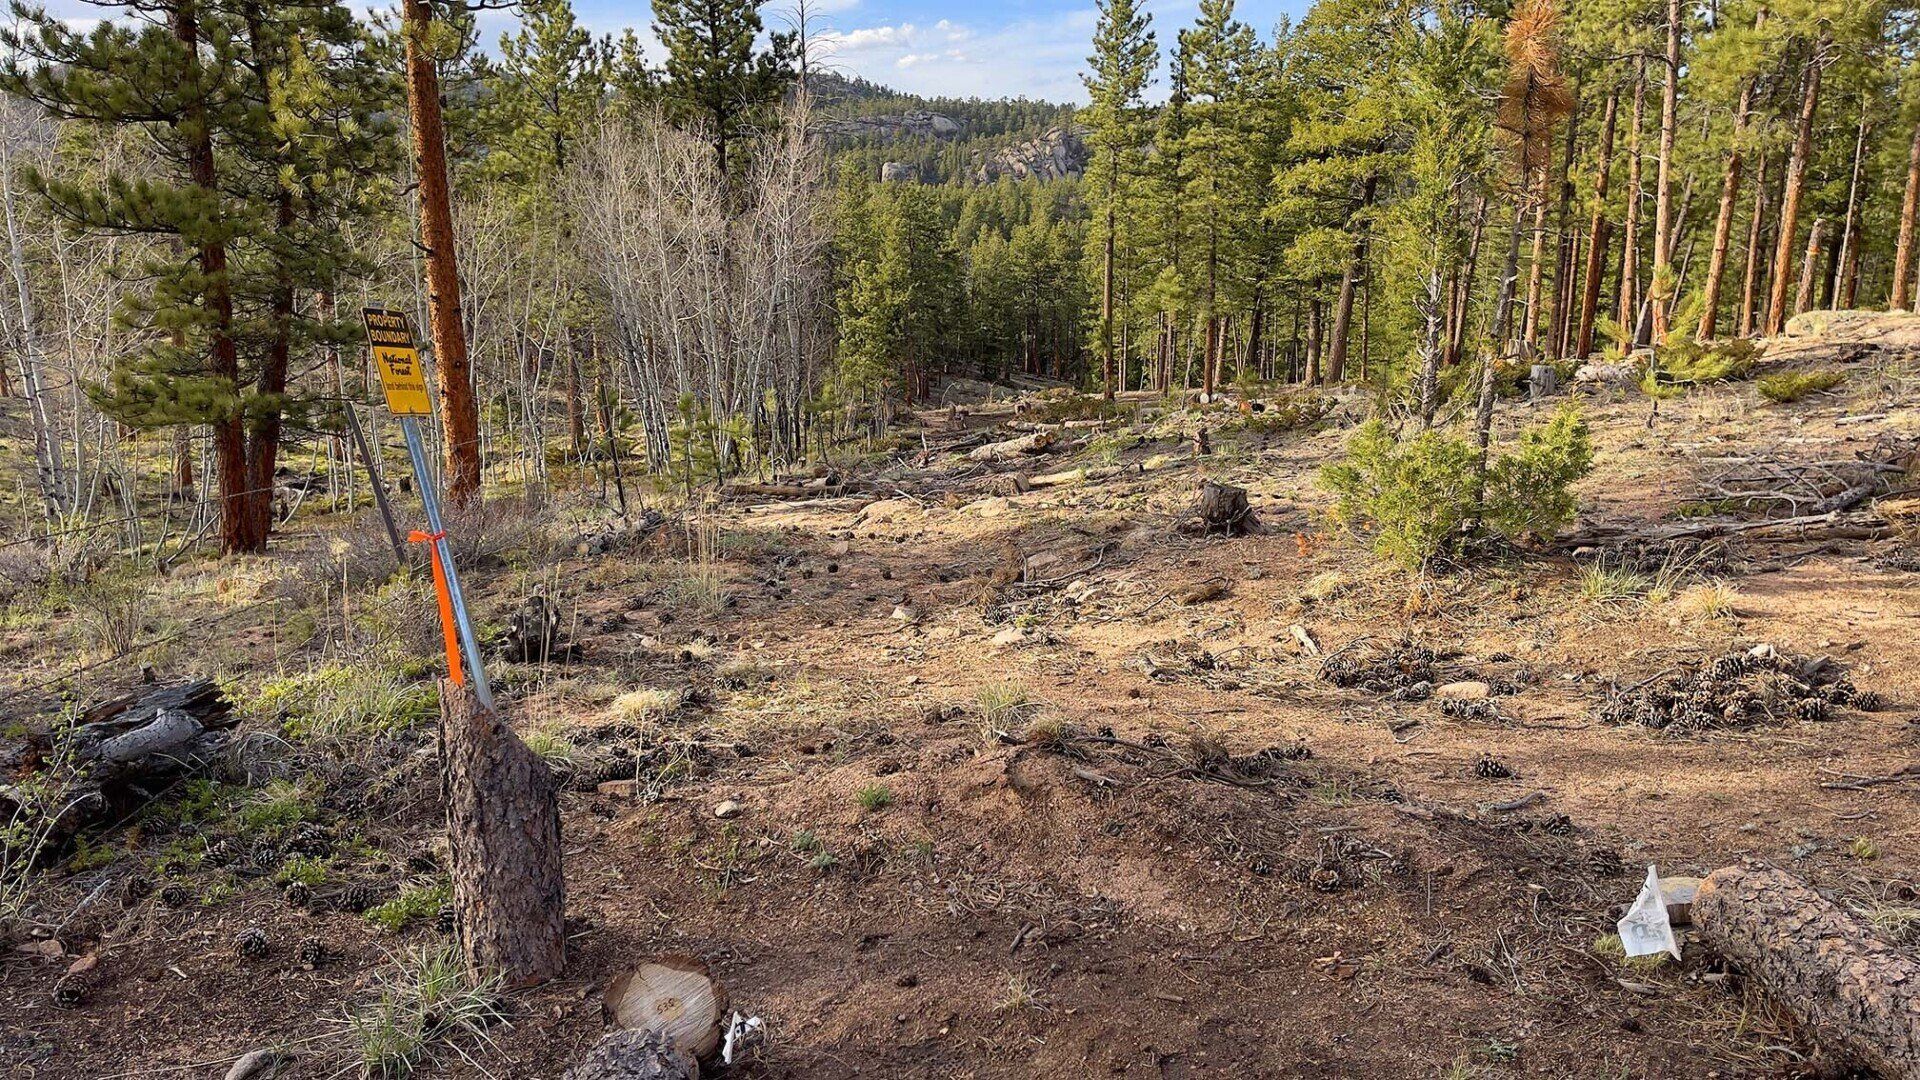 New disc golf hole 11 Pro tee at Sundance Trail Guest Ranch May 2022